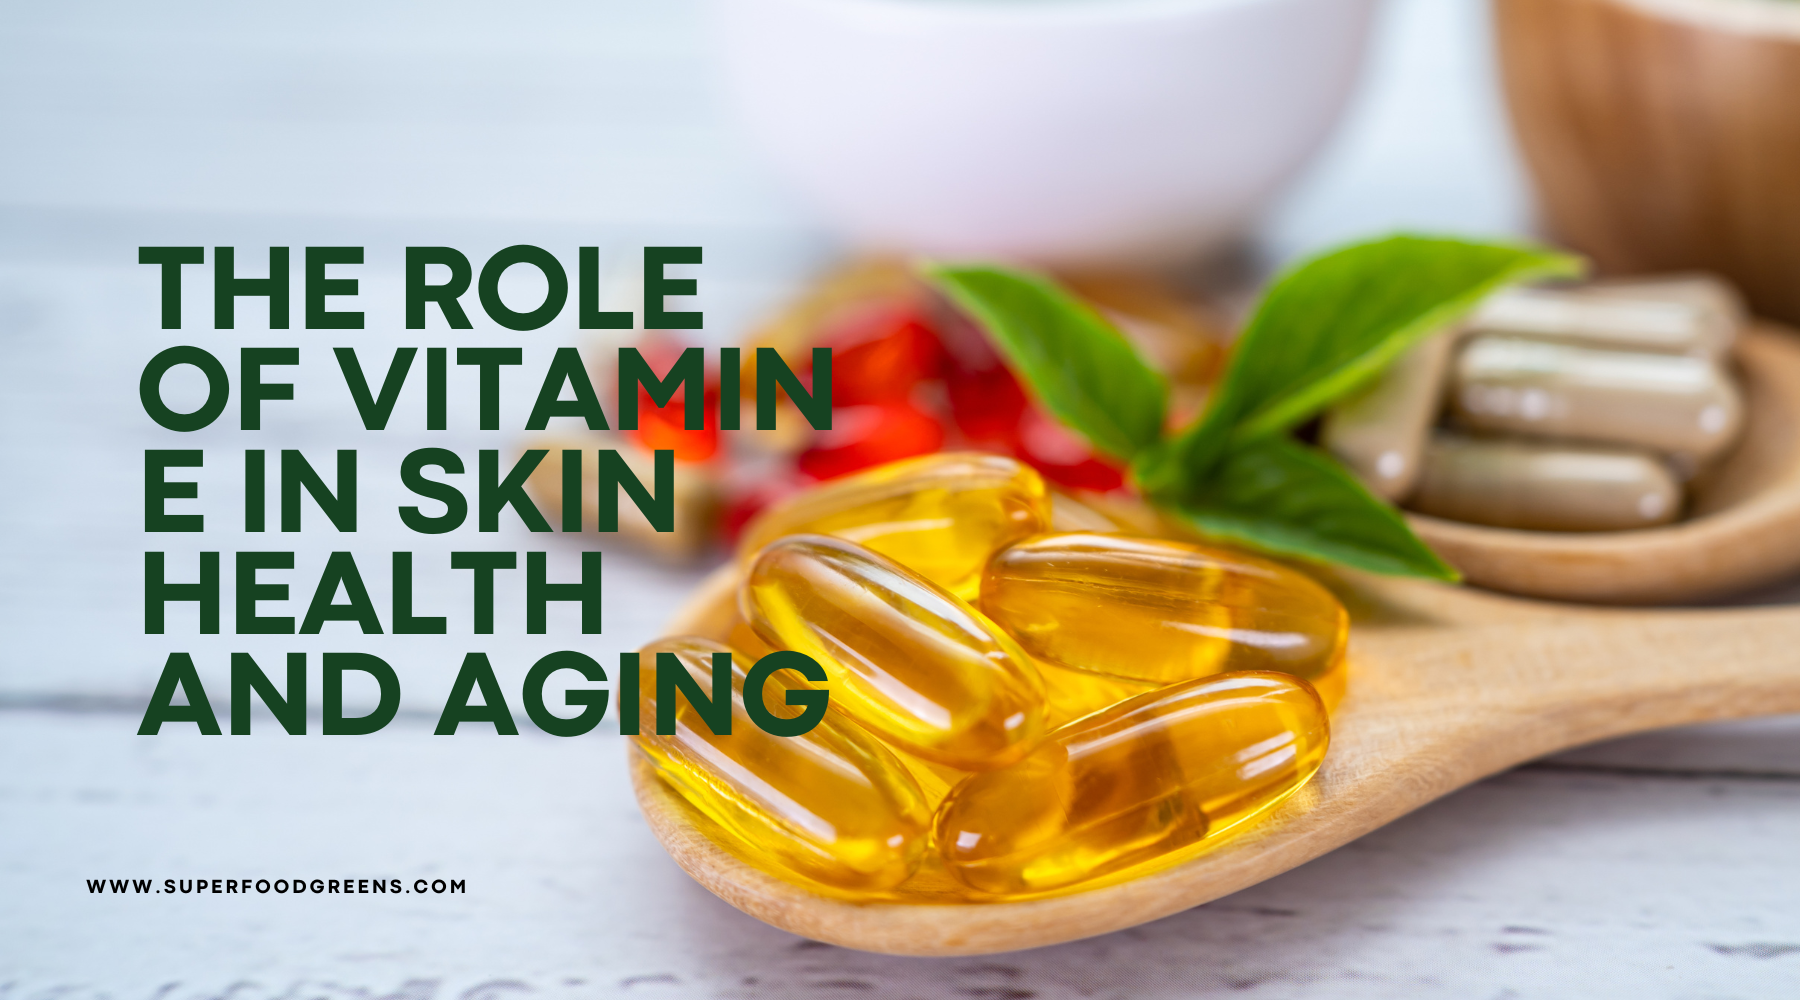 The Role of Vitamin E in Skin Health and Aging Vitamin E Skin Benefits, Anti-Aging Vitamin E, Vitamin E Skincare Regimen | Superfood Greens